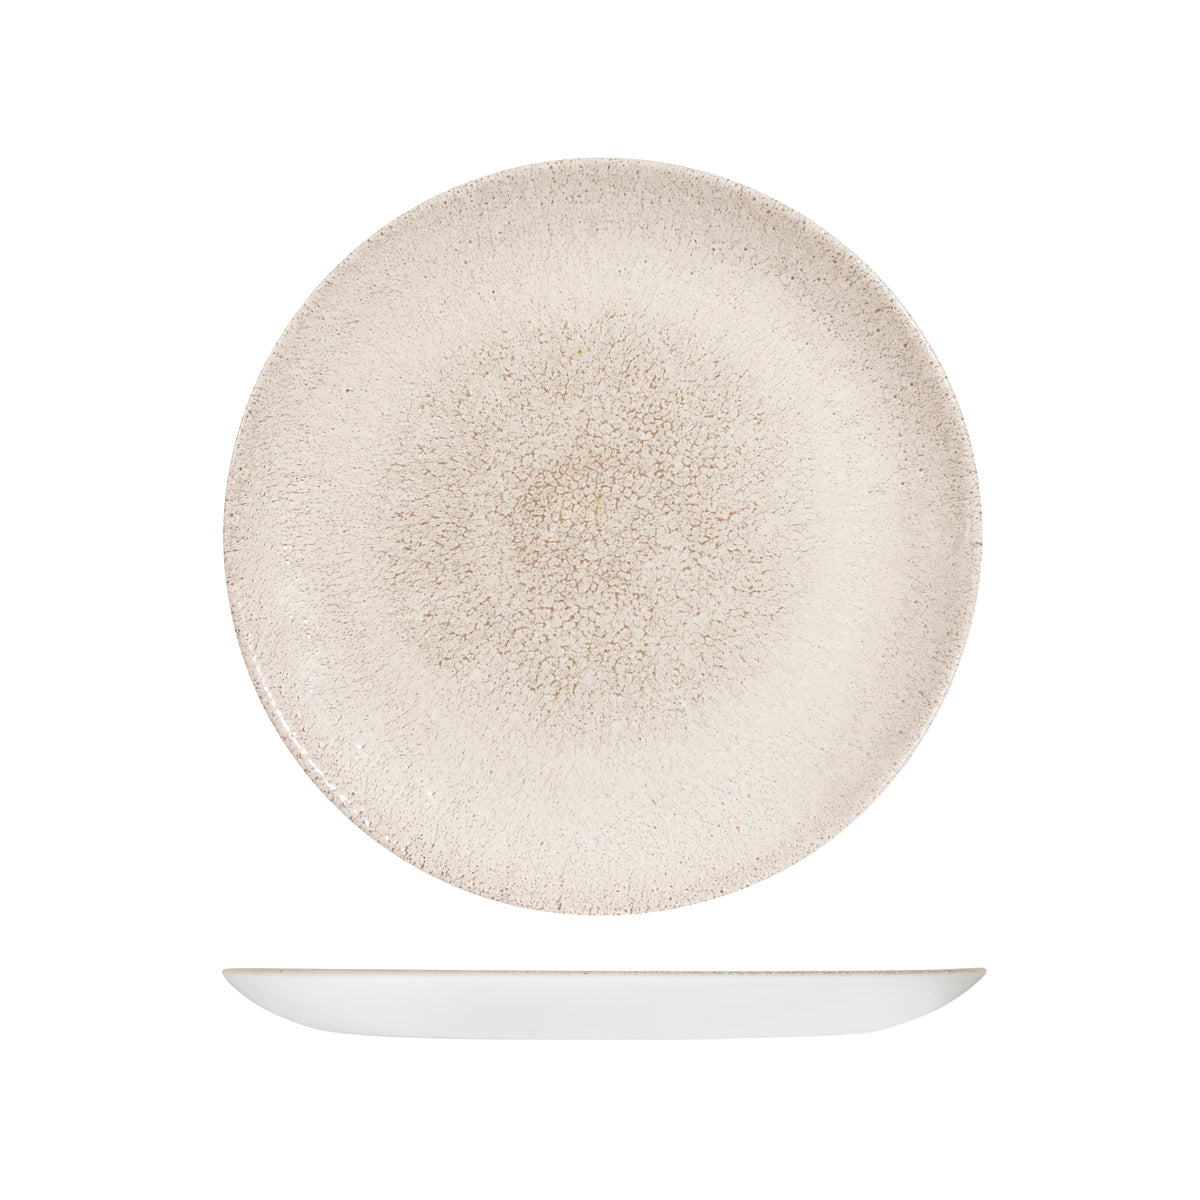 Round Plate - Coupe, 260mm, Raku, Agate Grey from Churchill. Textured, made out of Porcelain and sold in boxes of 6. Hospitality quality at wholesale price with The Flying Fork! 